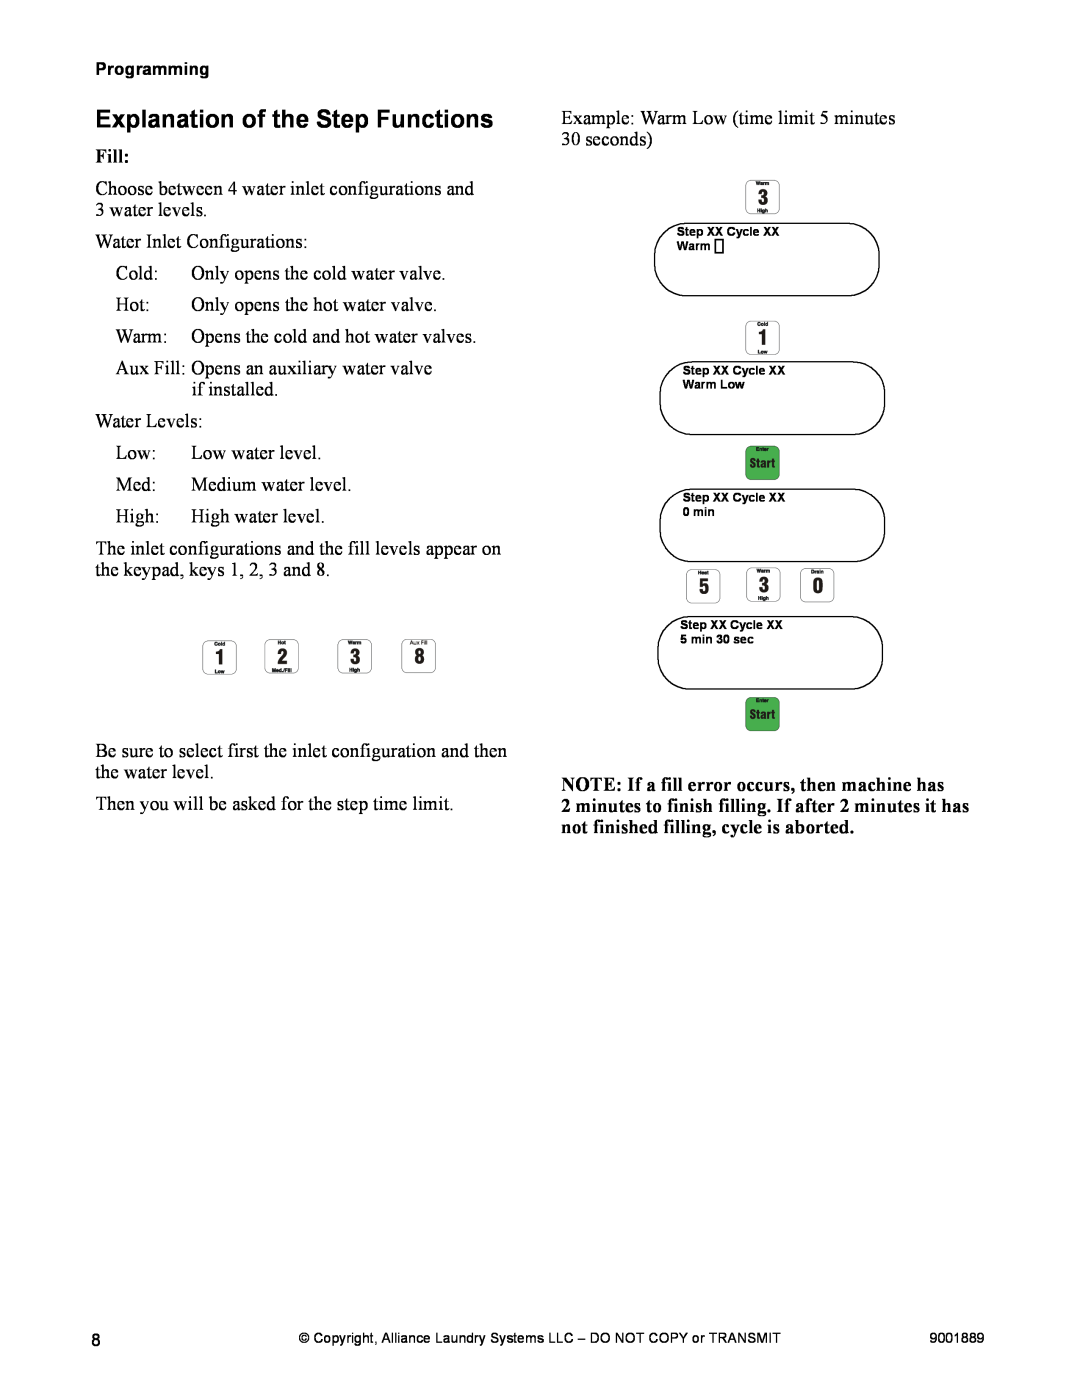 Alliance Laundry Systems 9001889R7 Explanation of the Step Functions, Fill, NOTE If a fill error occurs, then machine has 